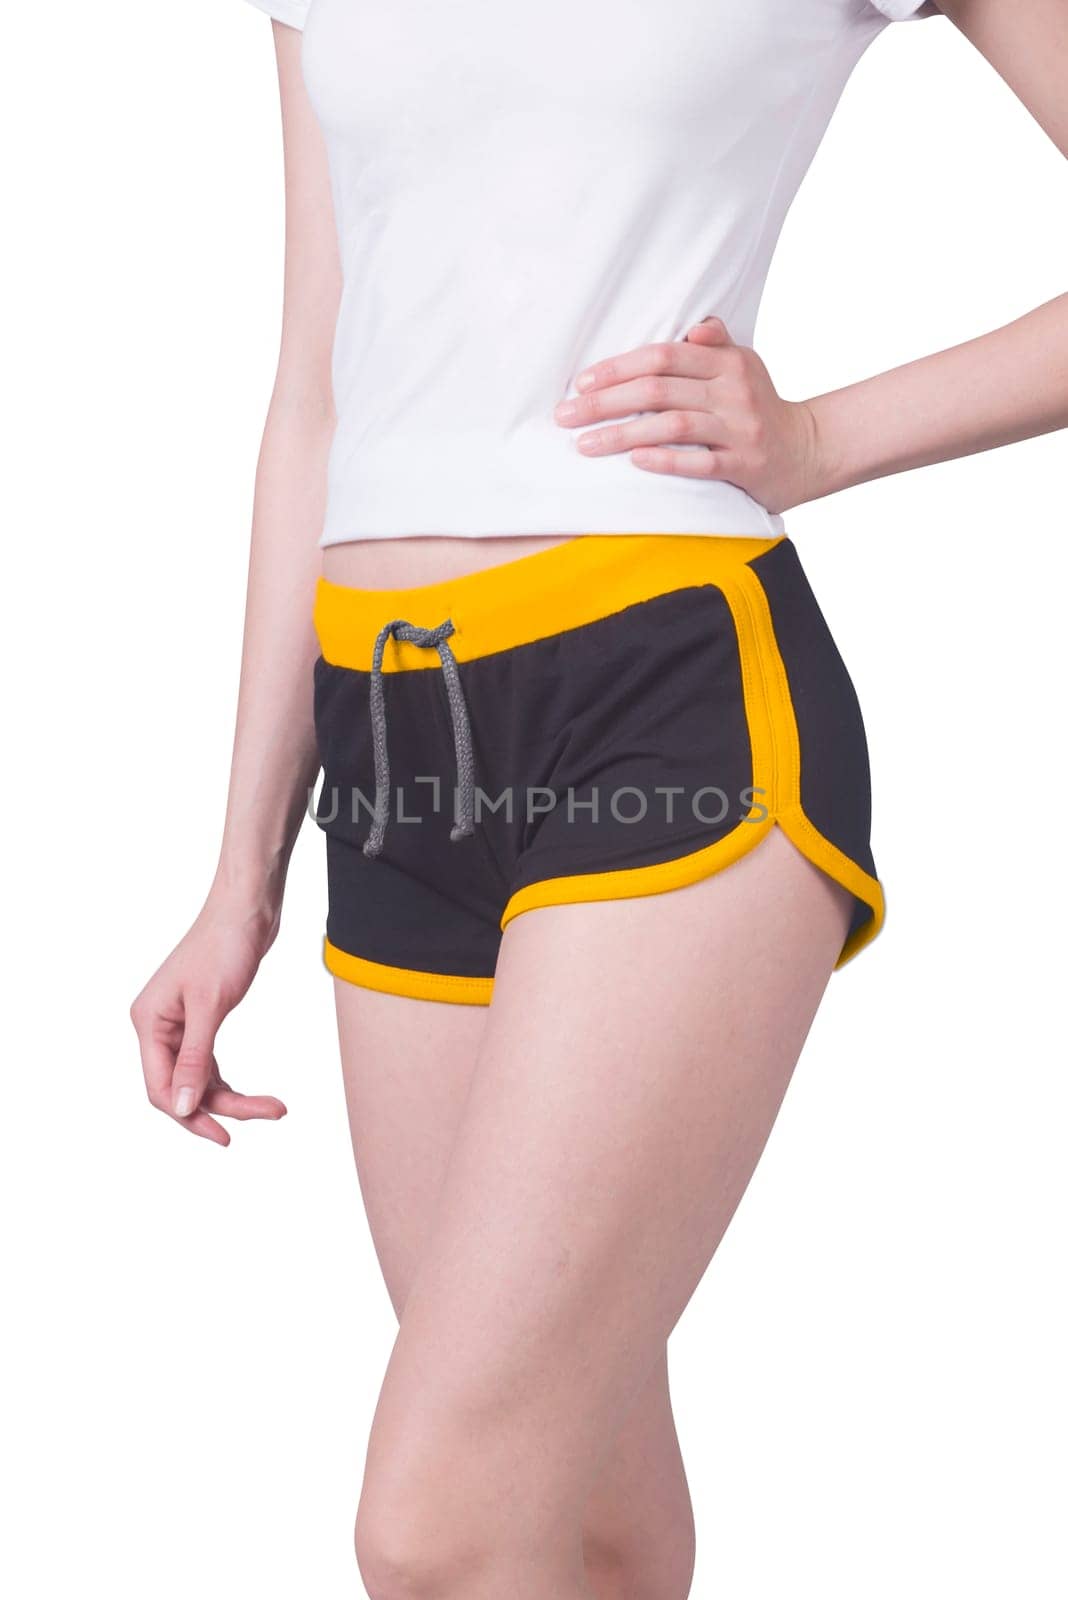 A female wearing sports clothes with short shorts by A_Karim